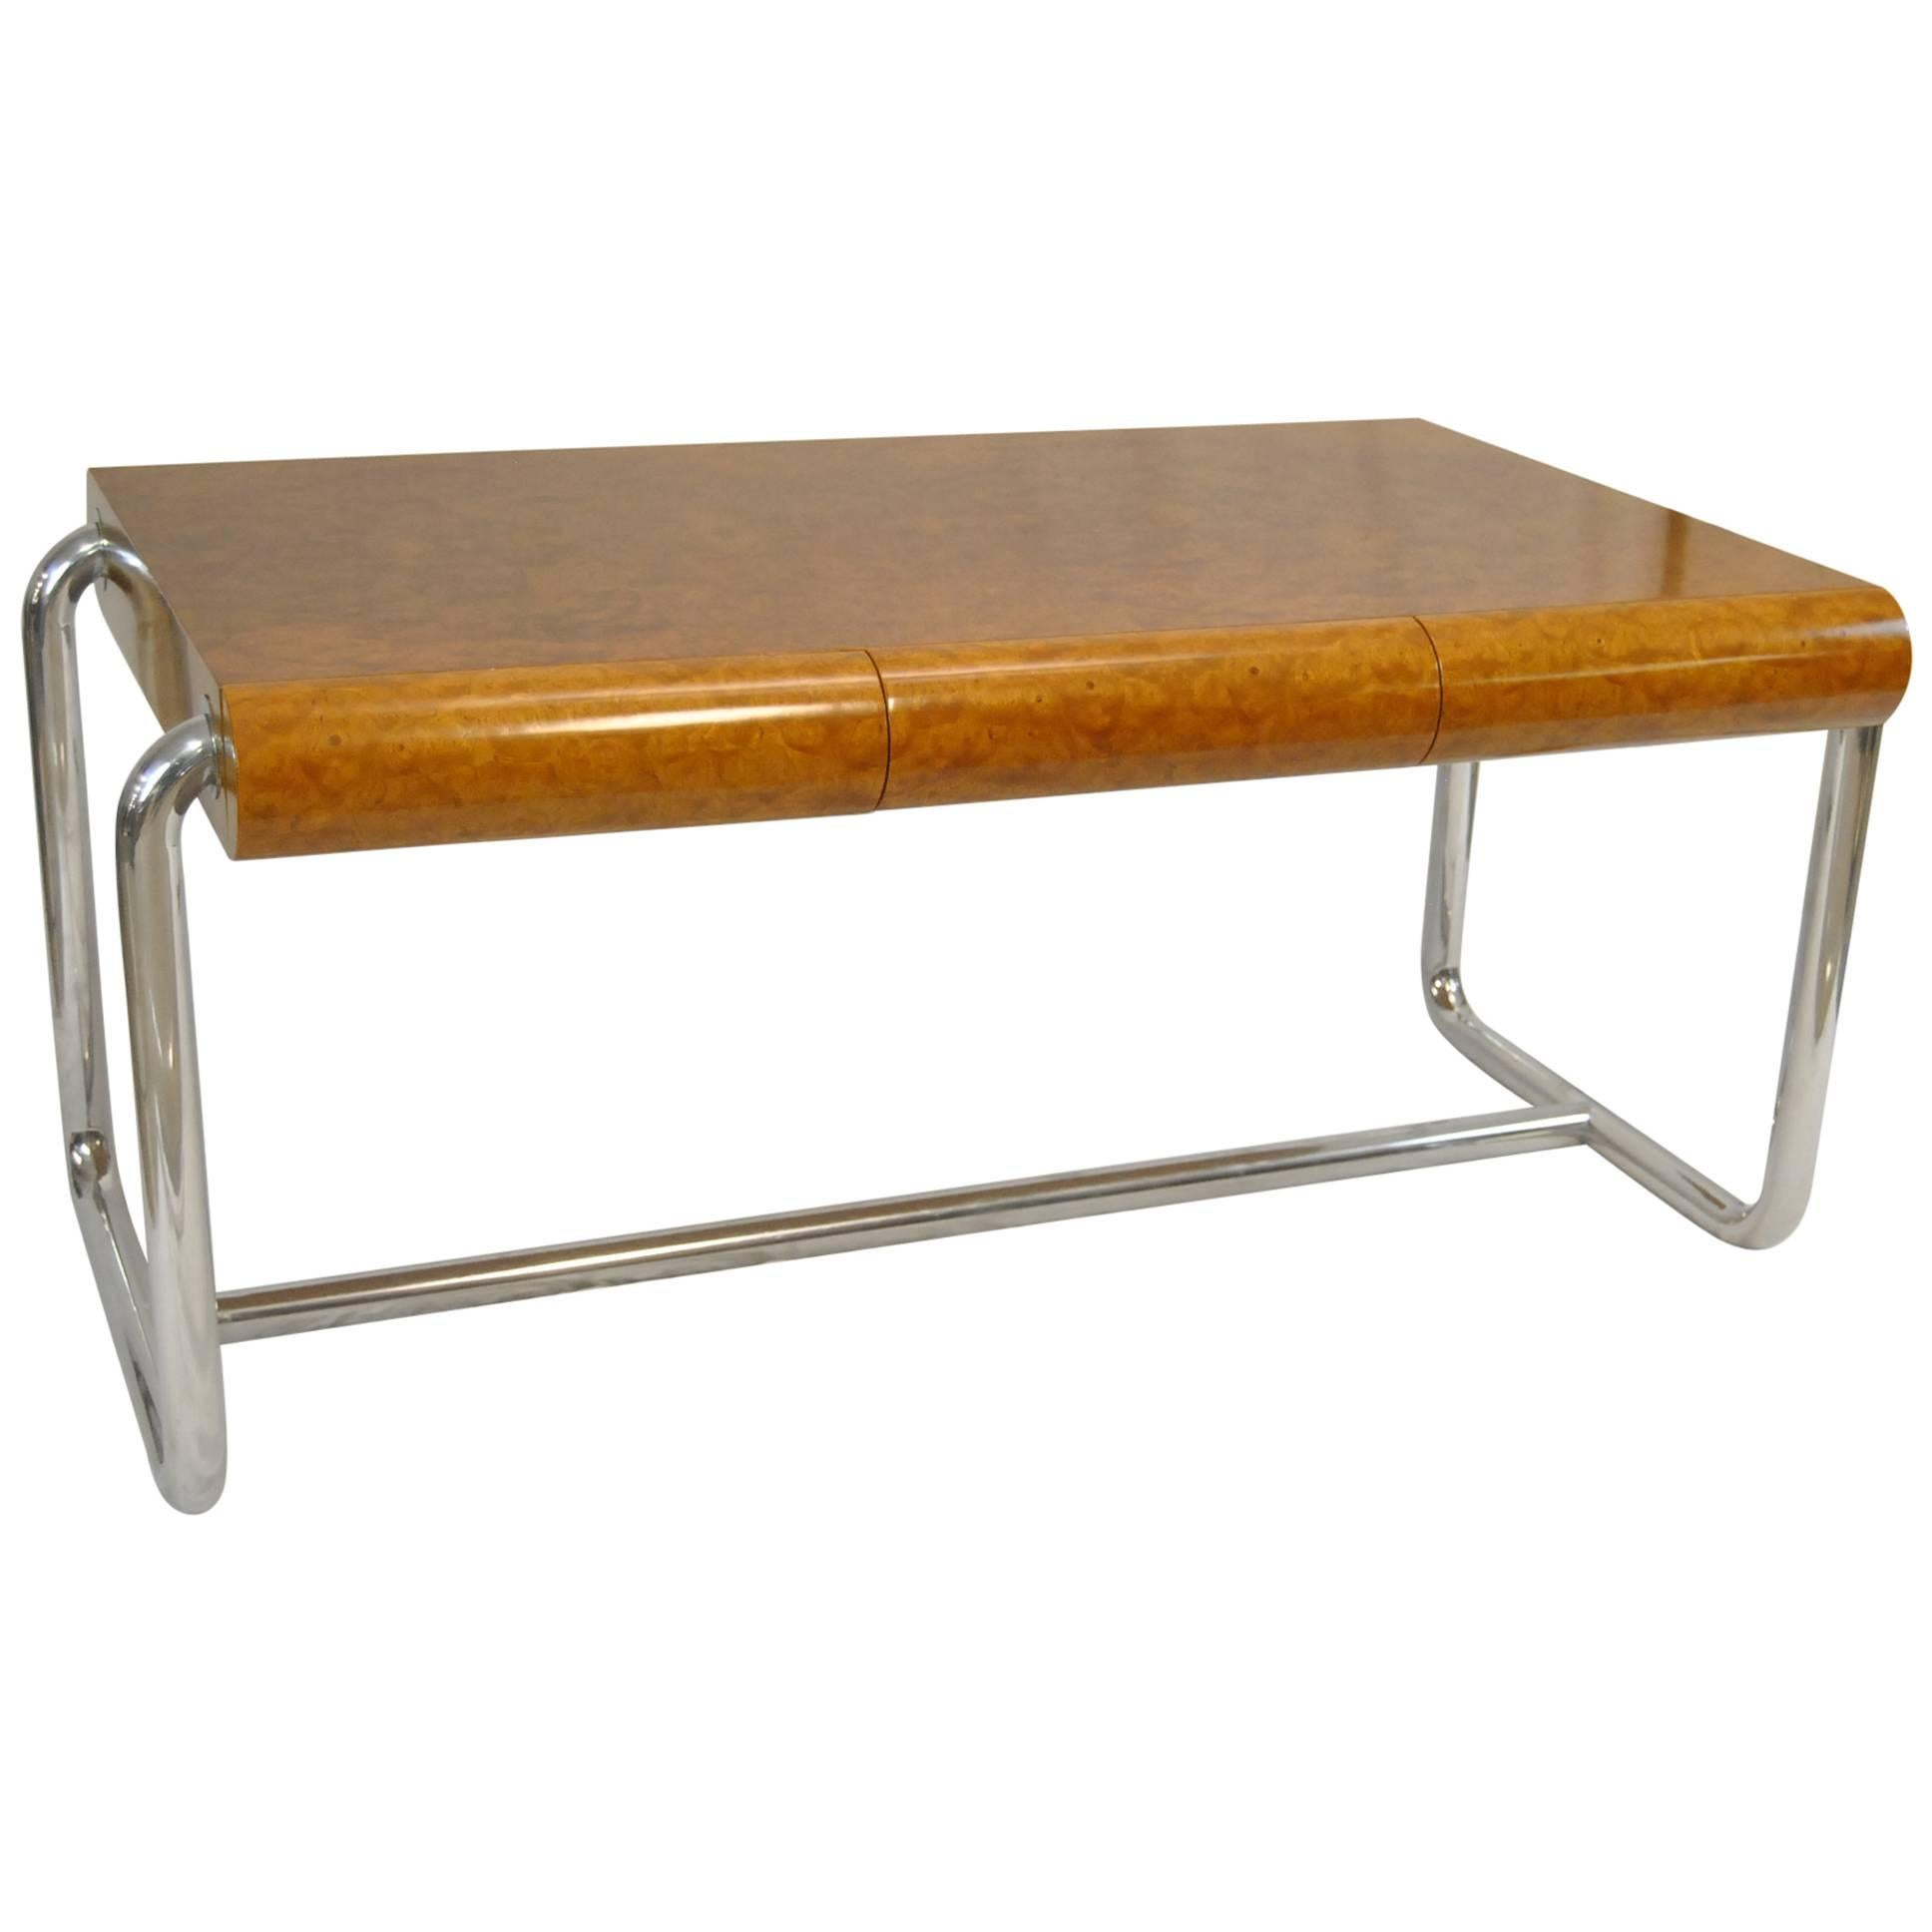 Burled Wood Mid-Century Modern Desk by Leon Rosen for the Pace Collection